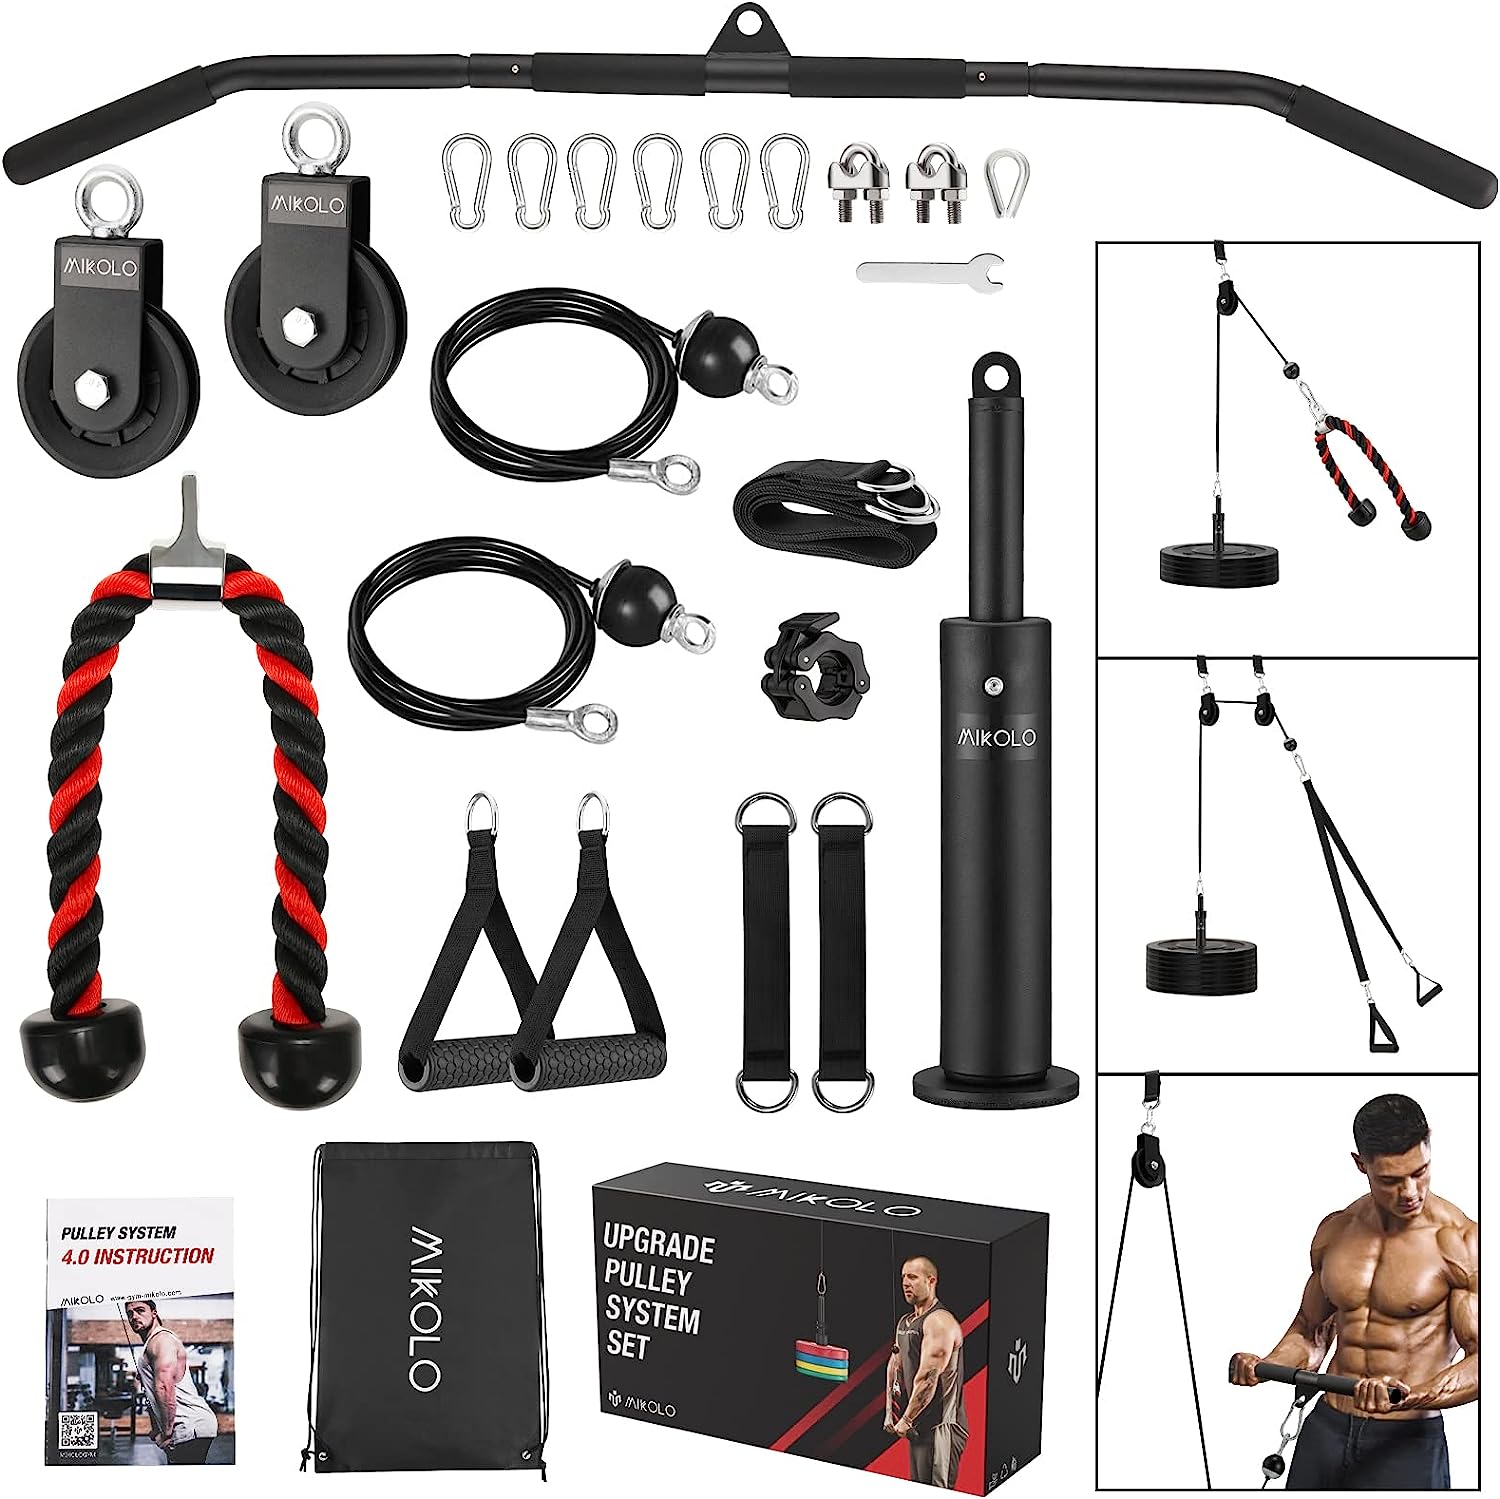 Mikolo Upgraded Weight Cable Pulley System Gym, LAT [...]